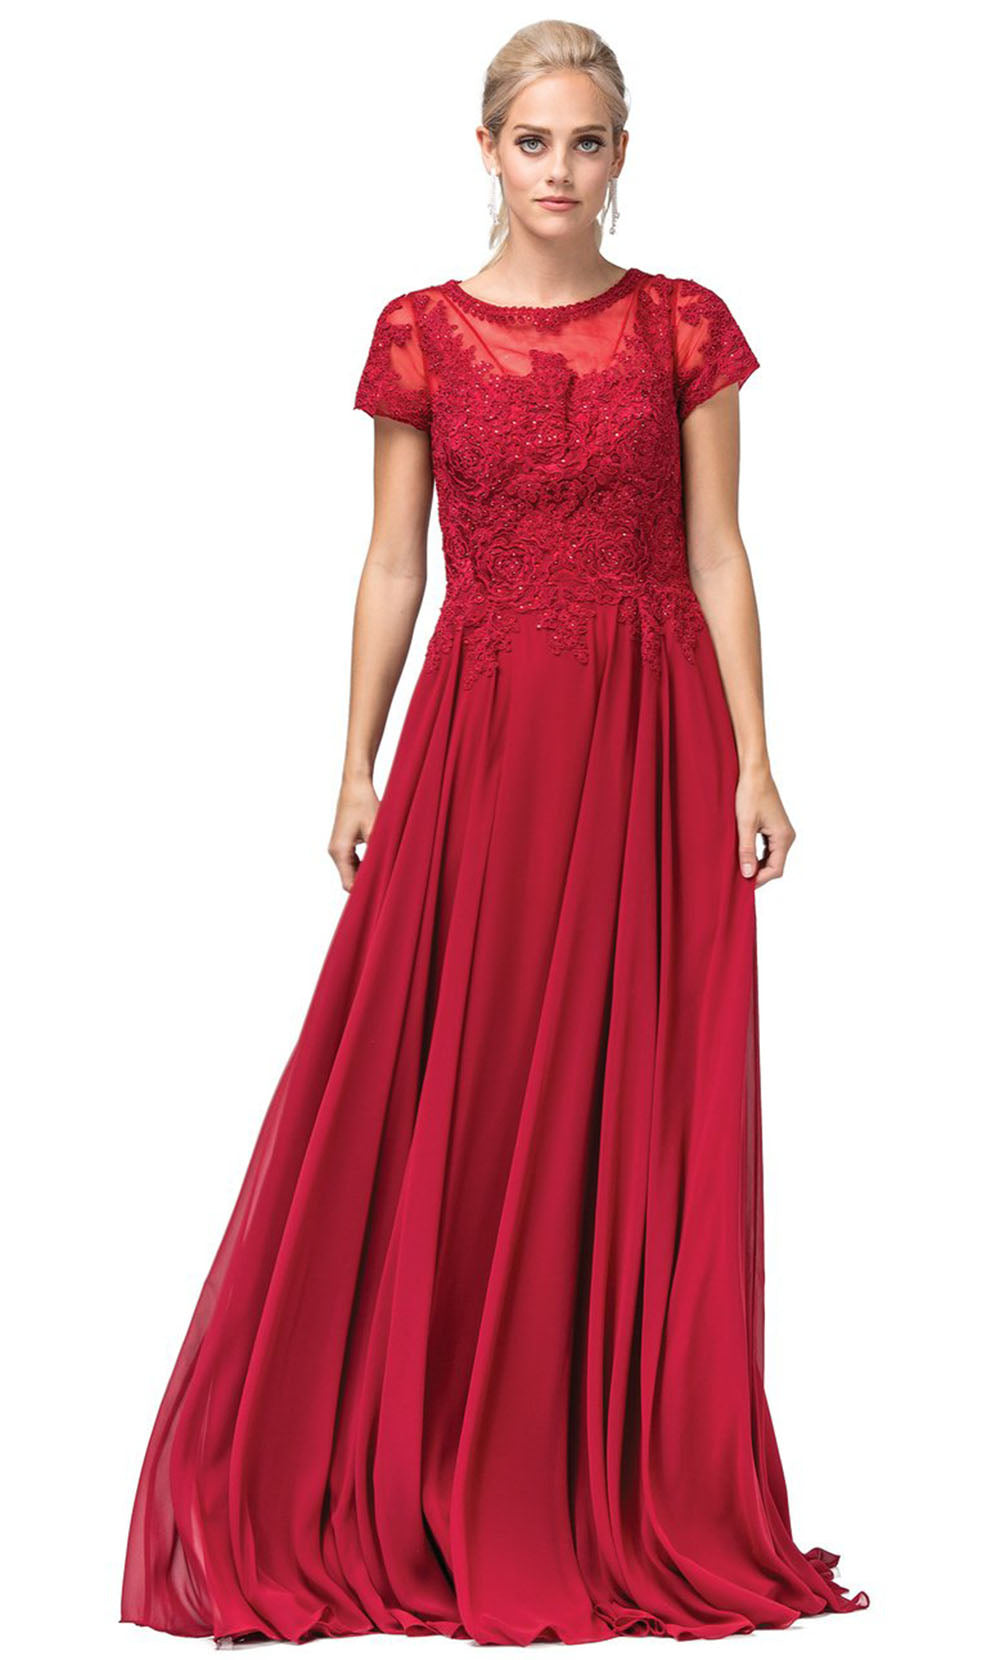 Dancing Queen - 2727 Embroidered Bateau Neck A-Line Gown In Red